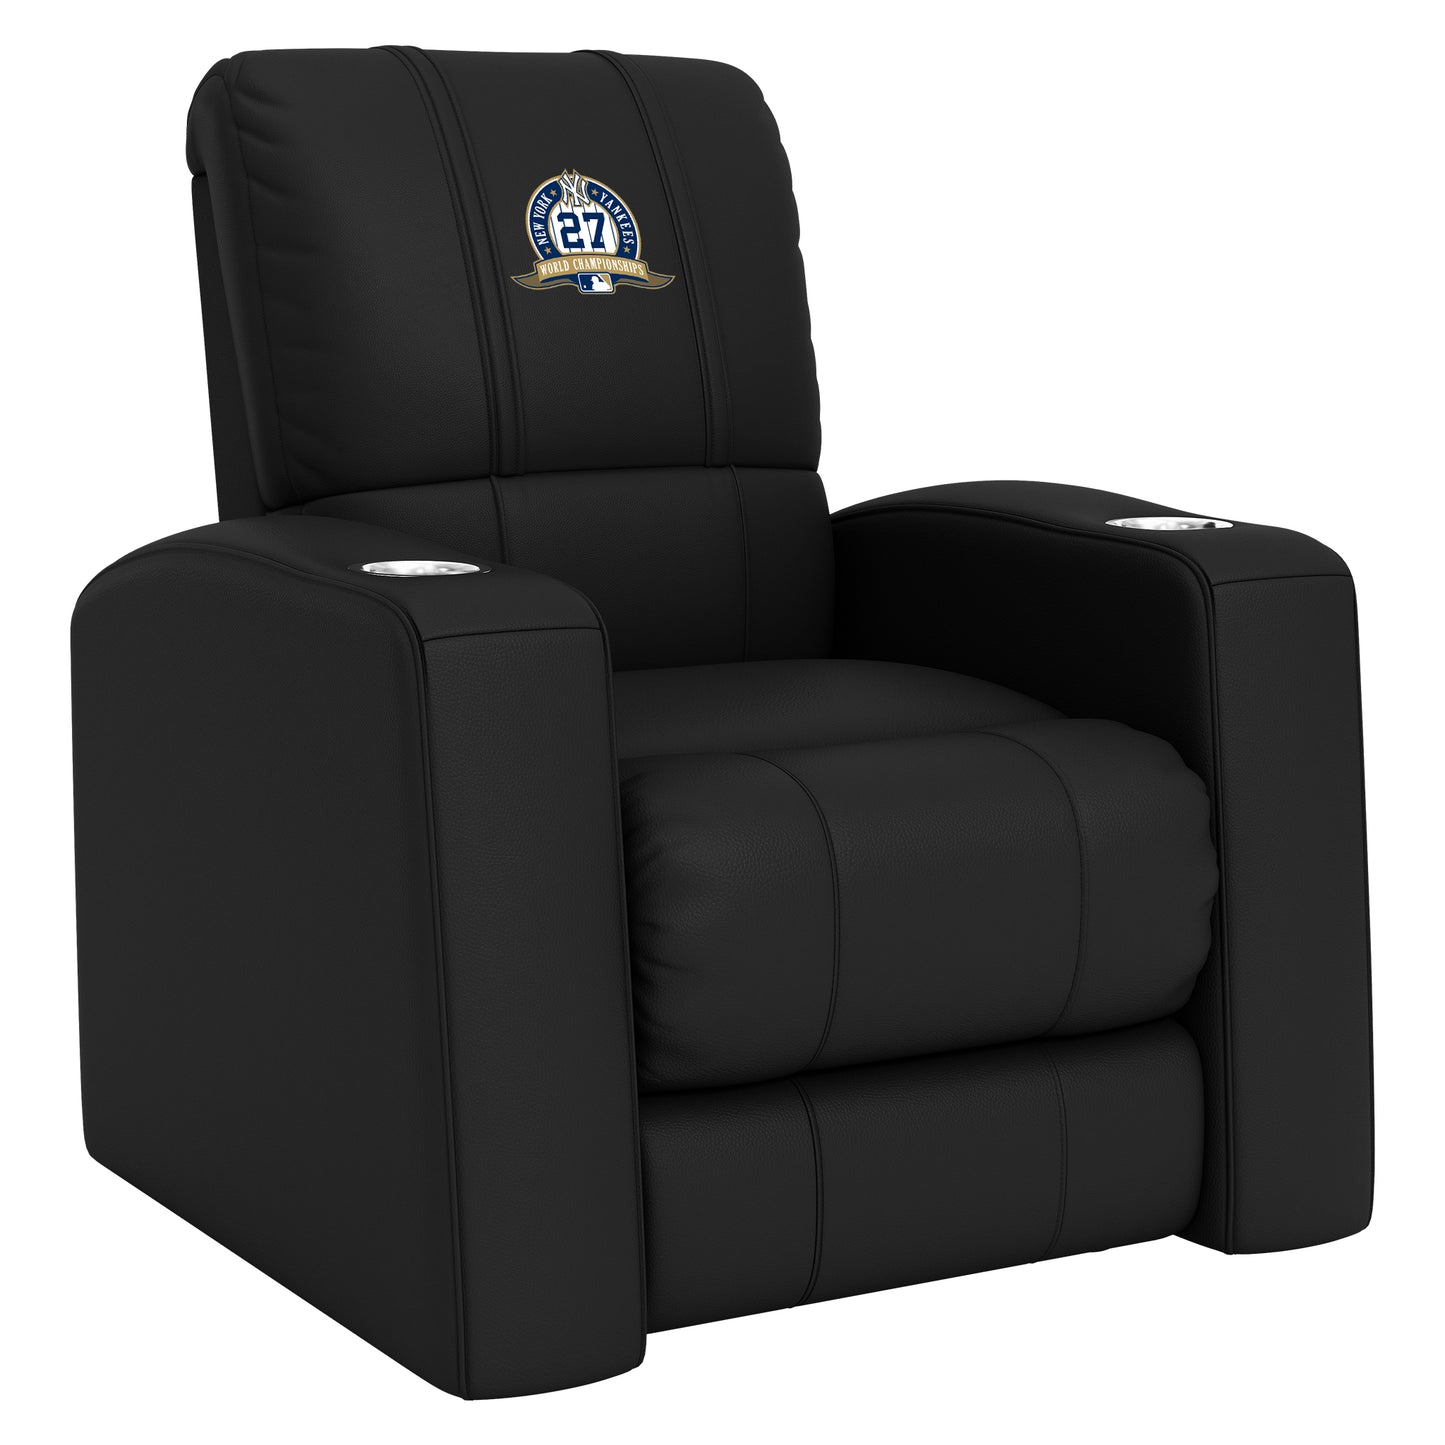 Relax Home Theater Recliner with New York Yankees 27th Champ